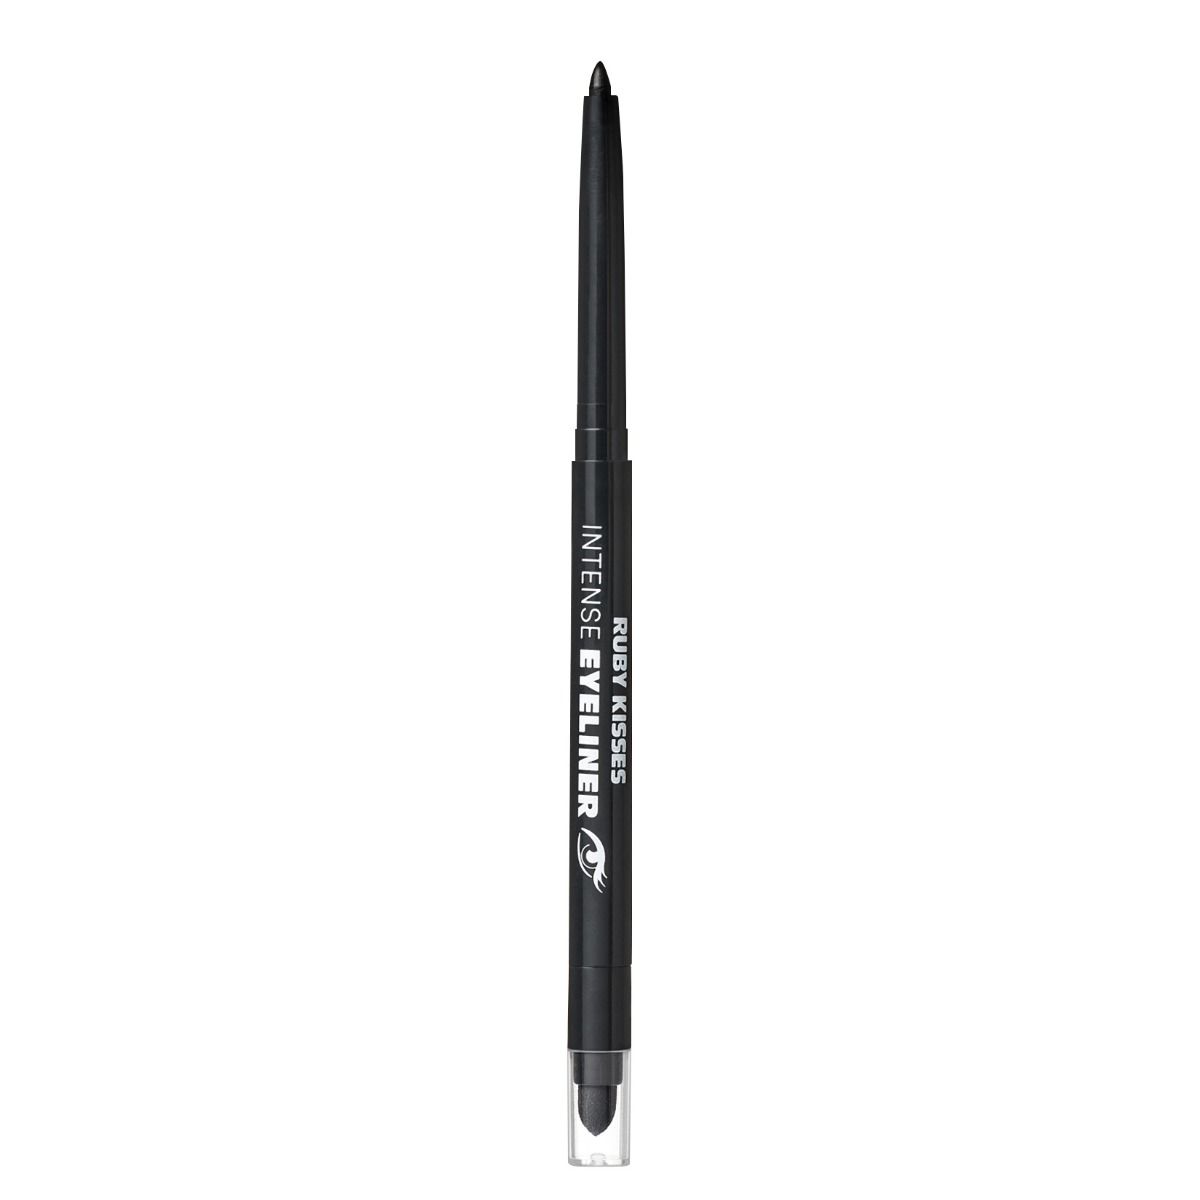 Ruby by Kiss Perfect Precision Auto Eyeliner Pencil with Smudger